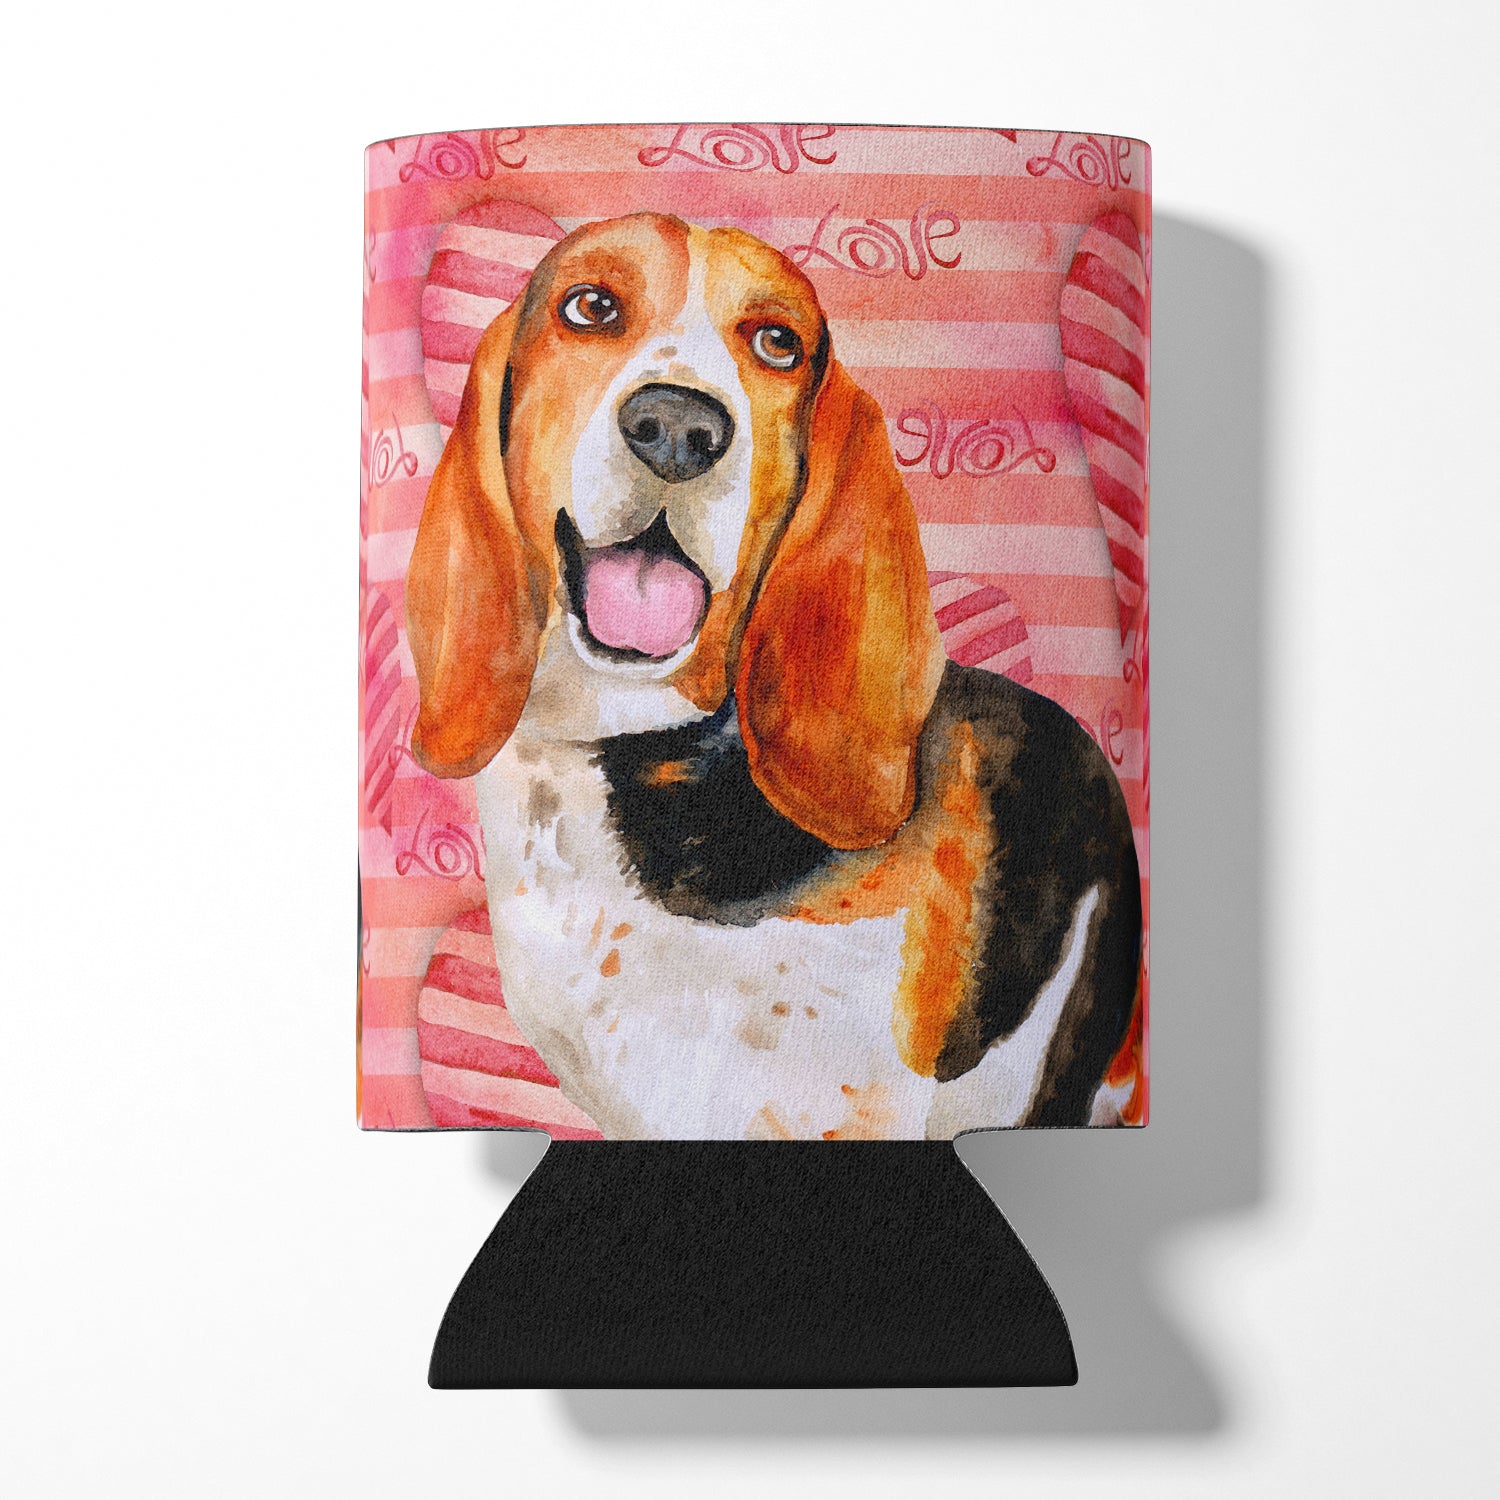 Basset Hound Love Can or Bottle Hugger BB9791CC  the-store.com.